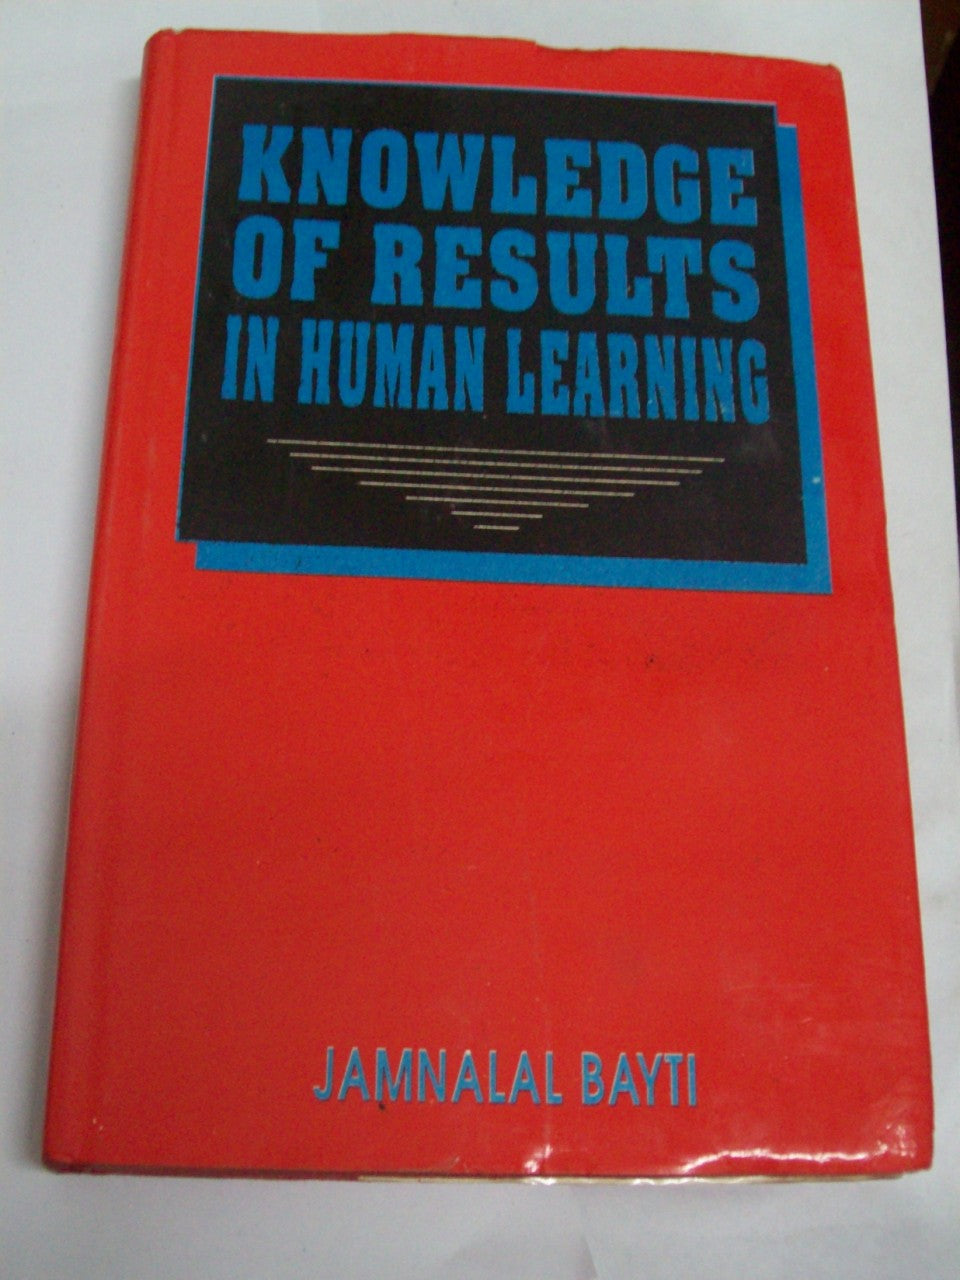 Knowledge Of Results In Human Learning